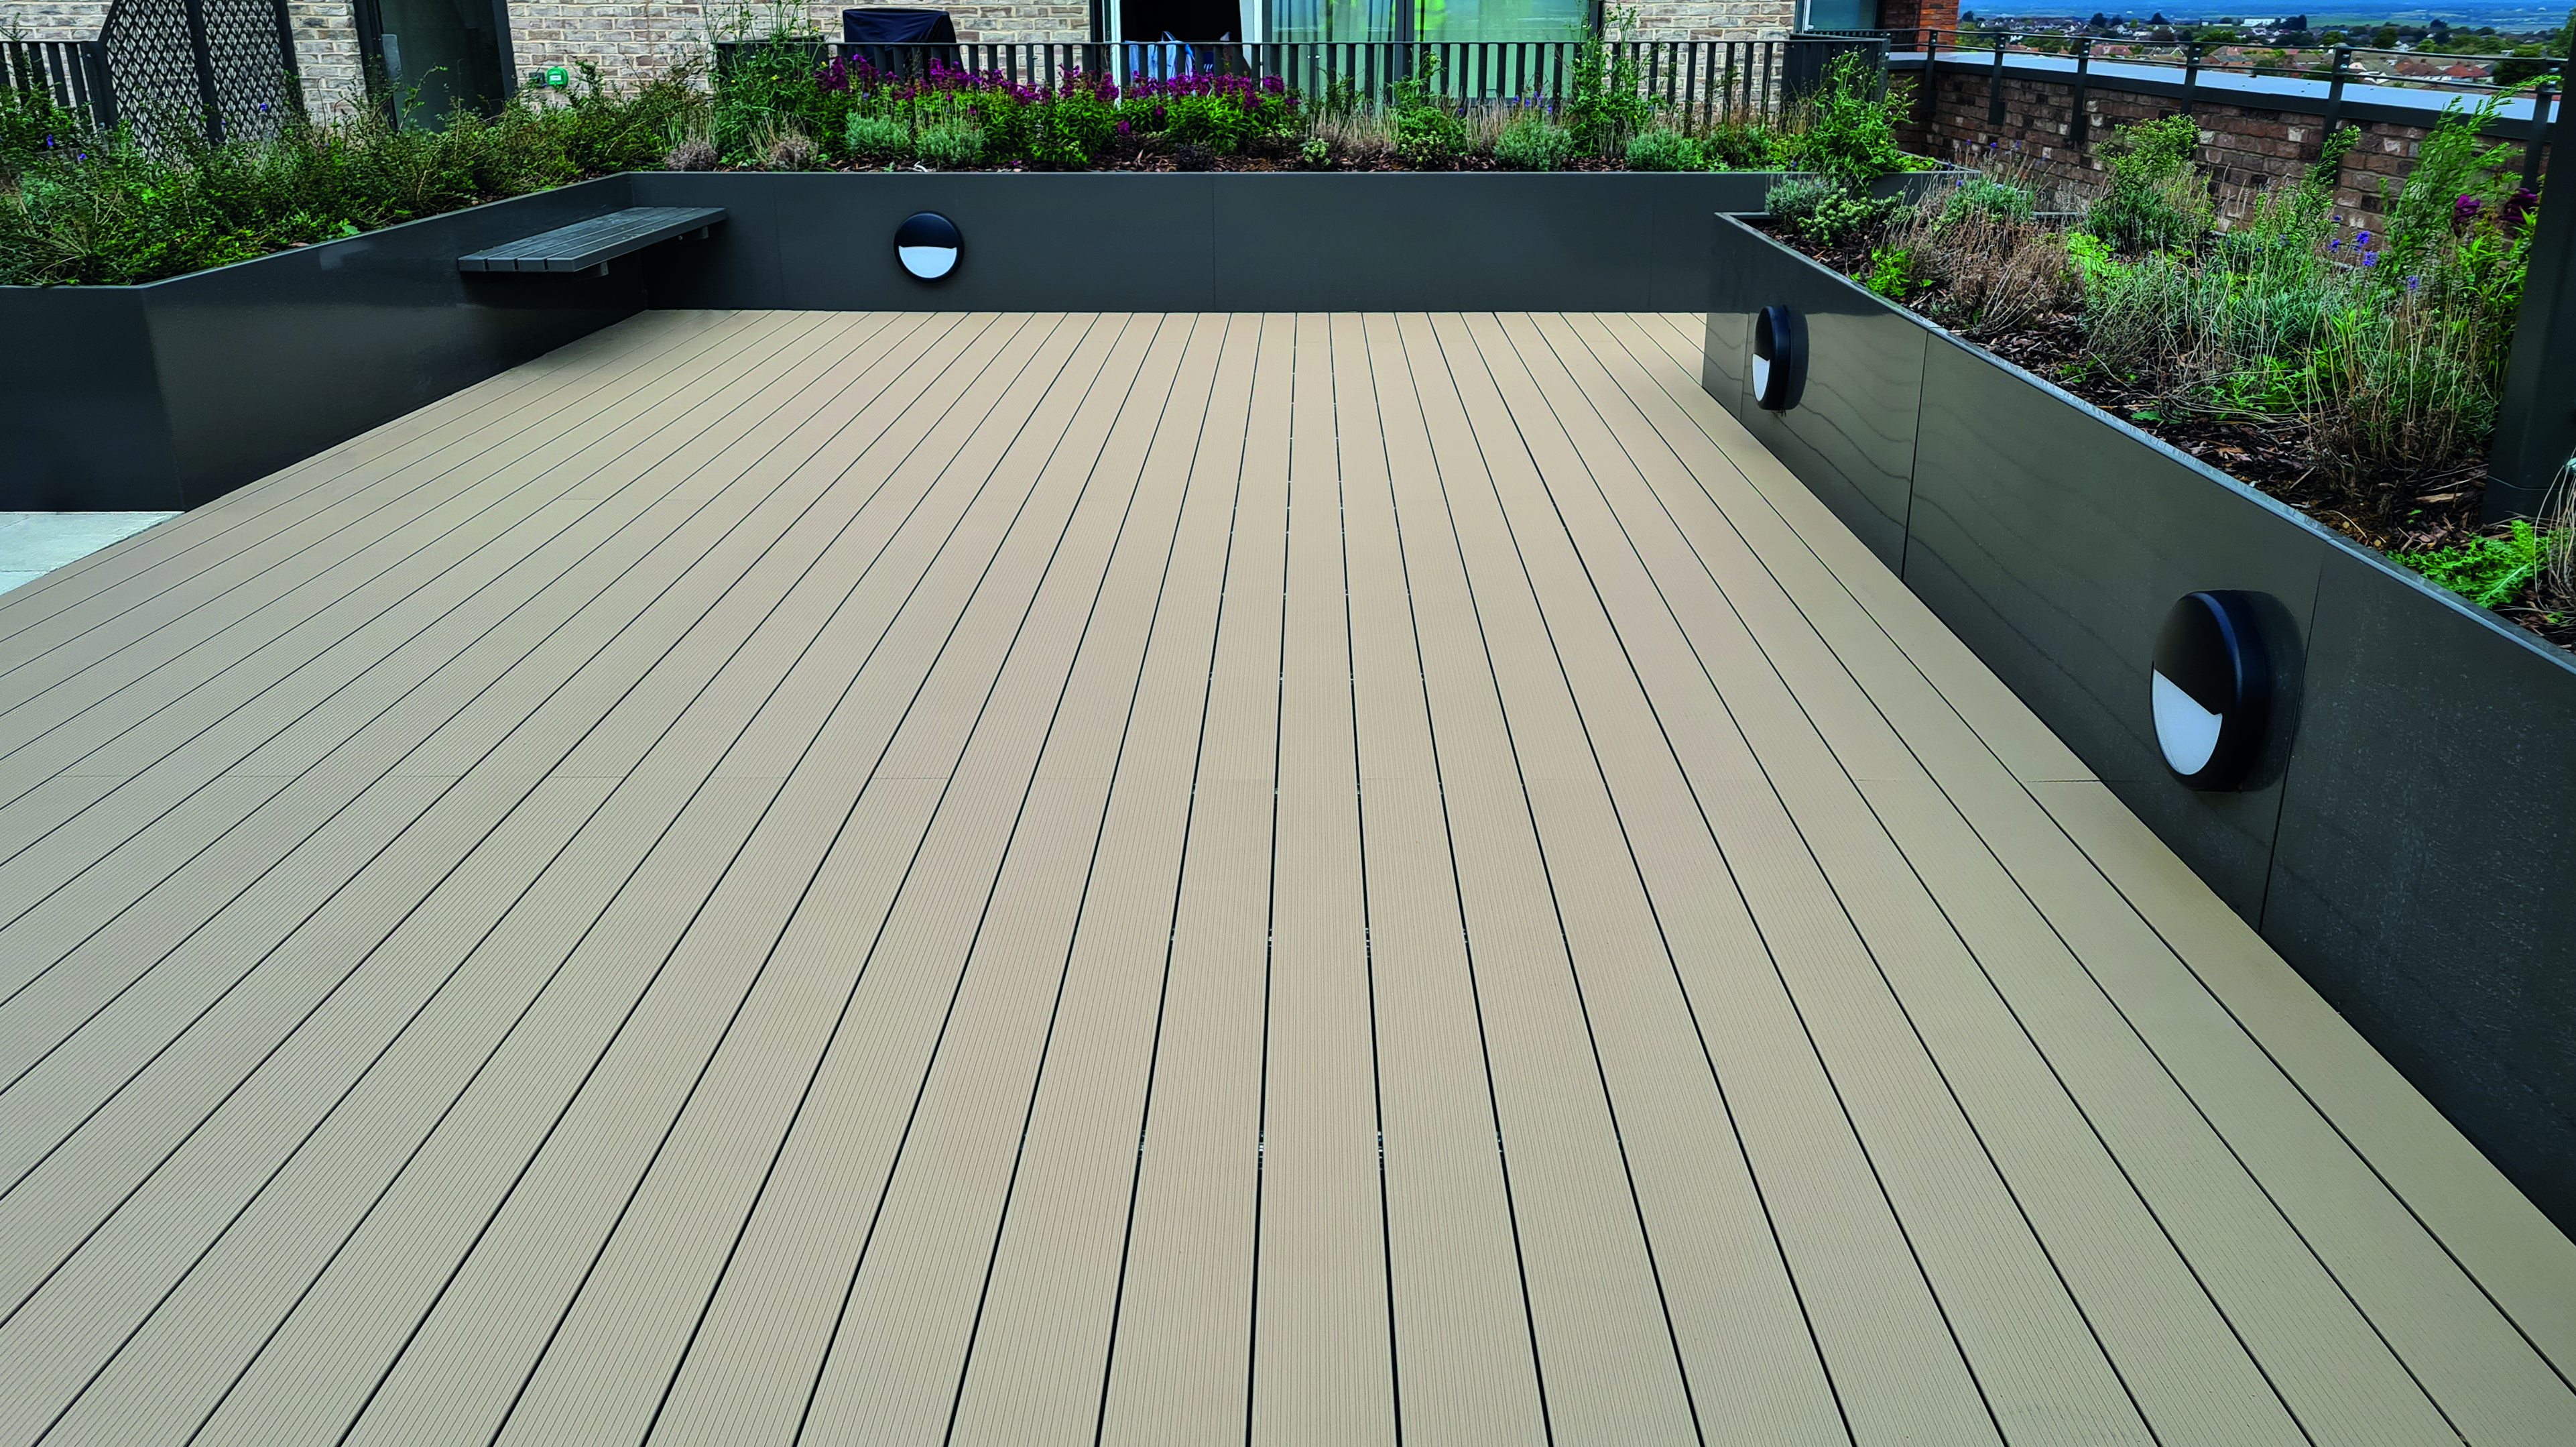 Alfresco Floors: Class A Fire Rated Flooring Systems For Your Next Project